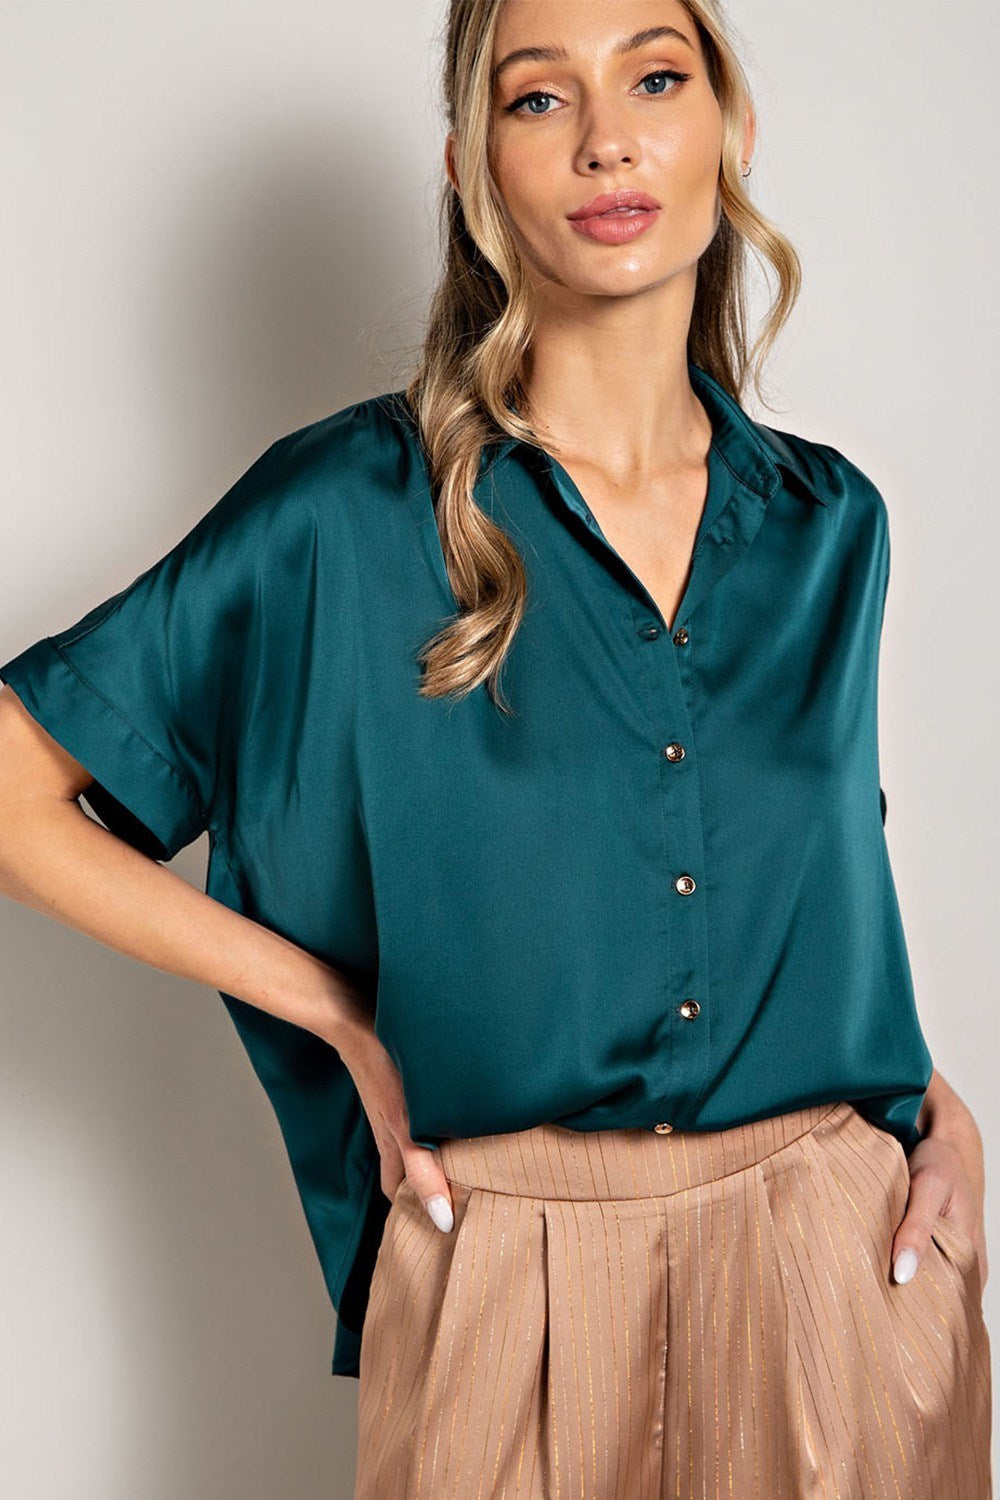 Satin Short Sleeve Button Down Shirt in Teal by ee:some